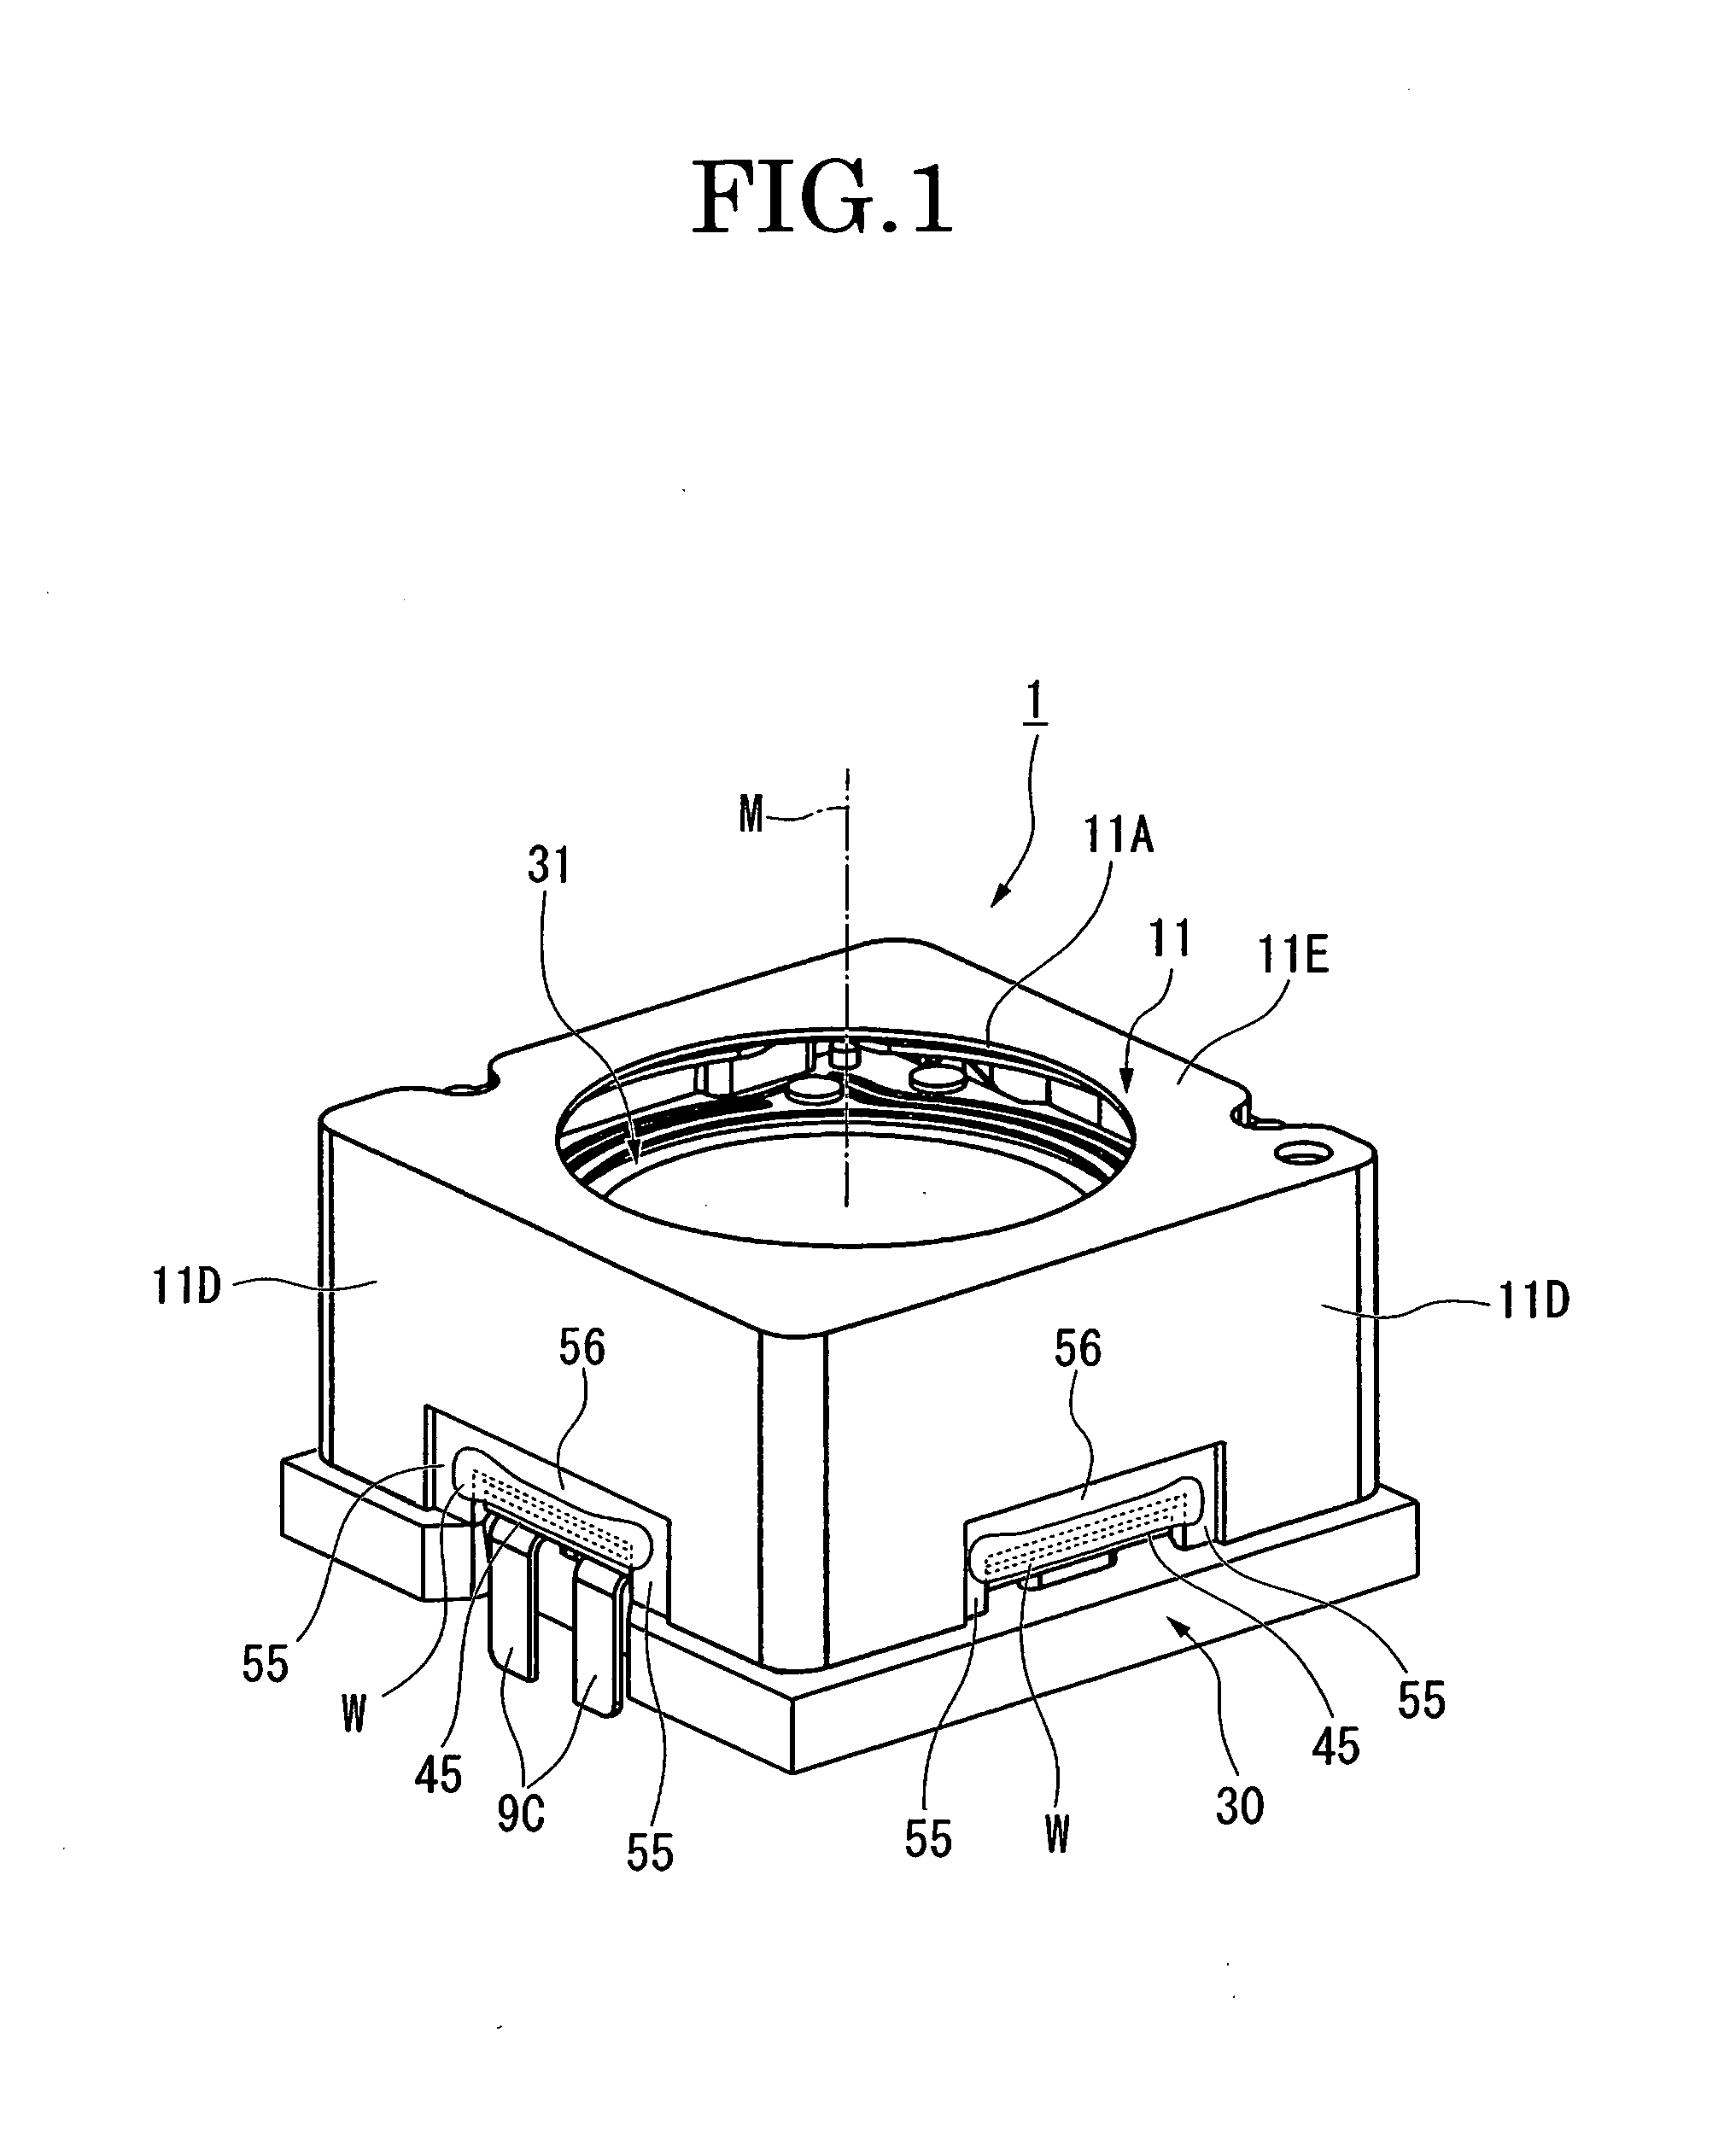 Driver module and electronic device